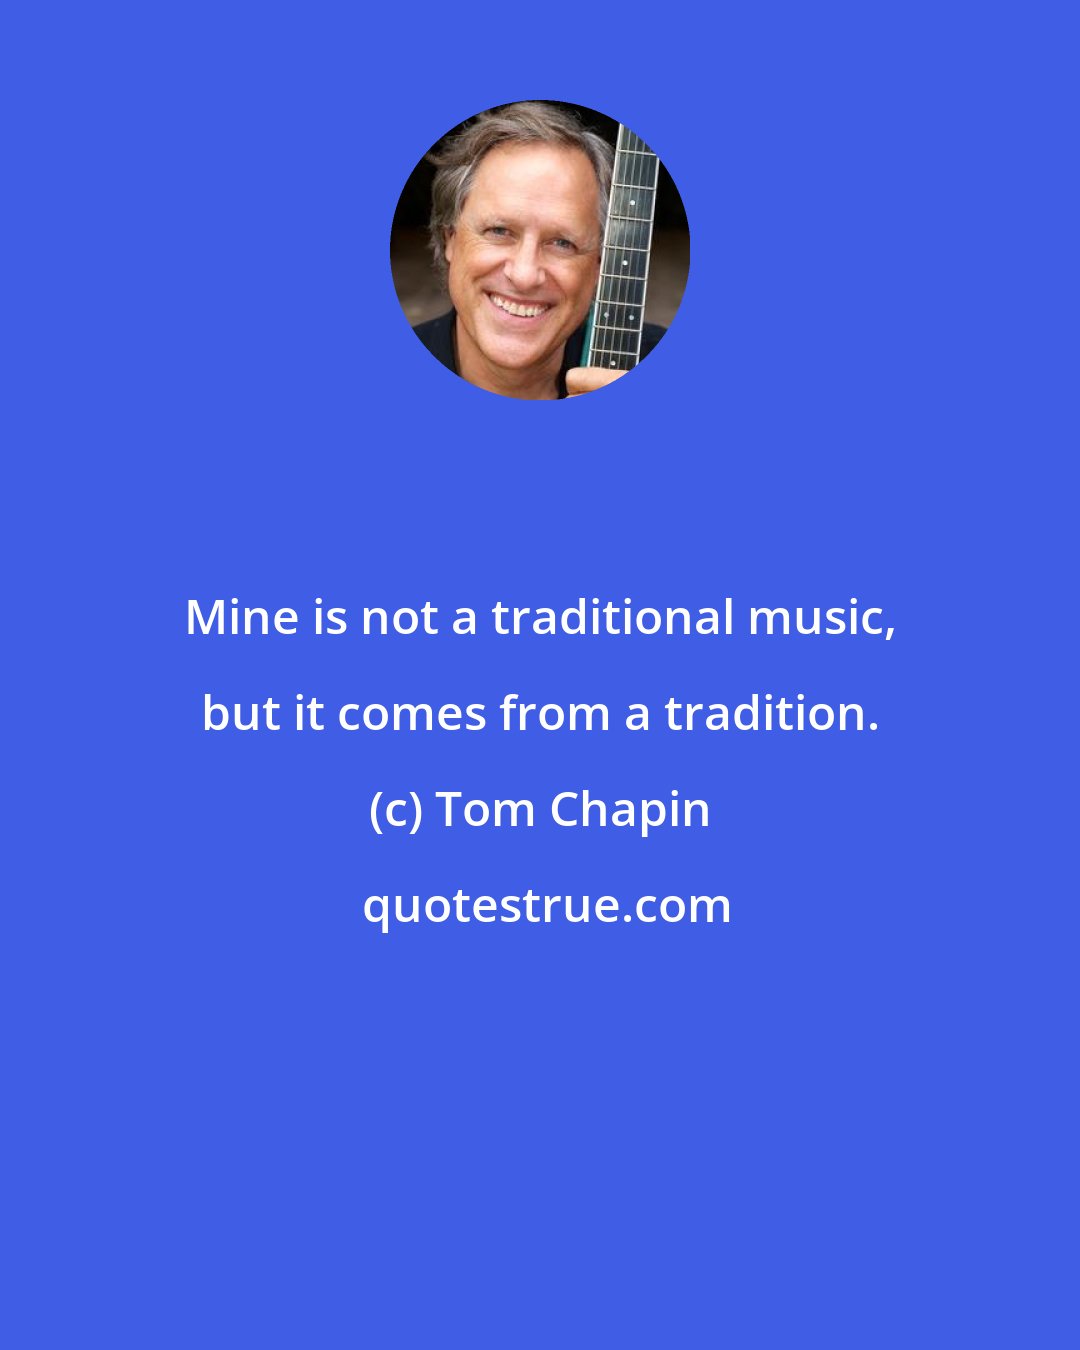 Tom Chapin: Mine is not a traditional music, but it comes from a tradition.